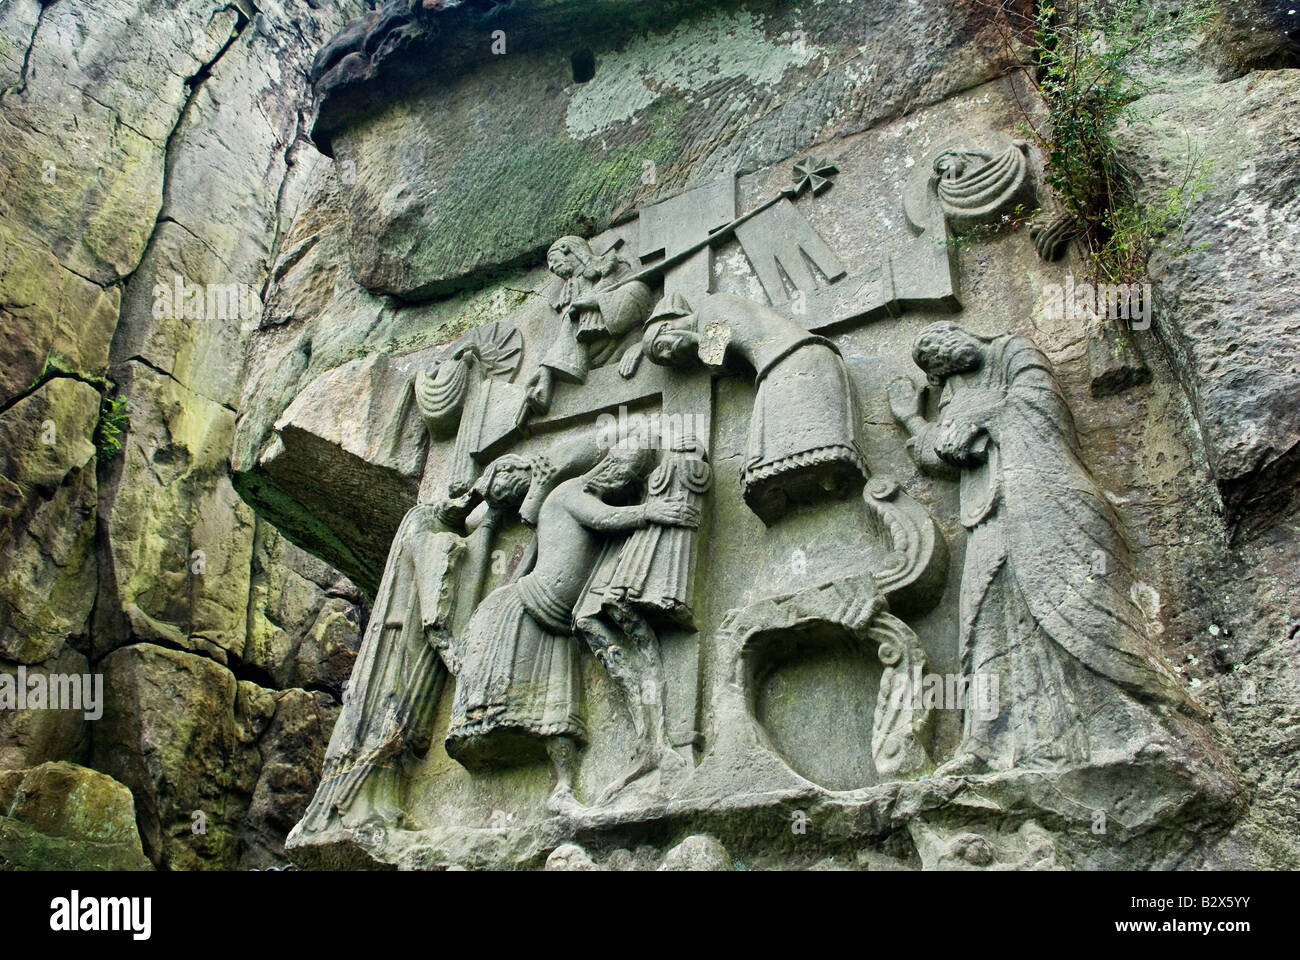 The Descent from the Cross Christian mediaeval relief on natural stone pillars at Externsteine. Teutoburger Wald region, Germany Stock Photo